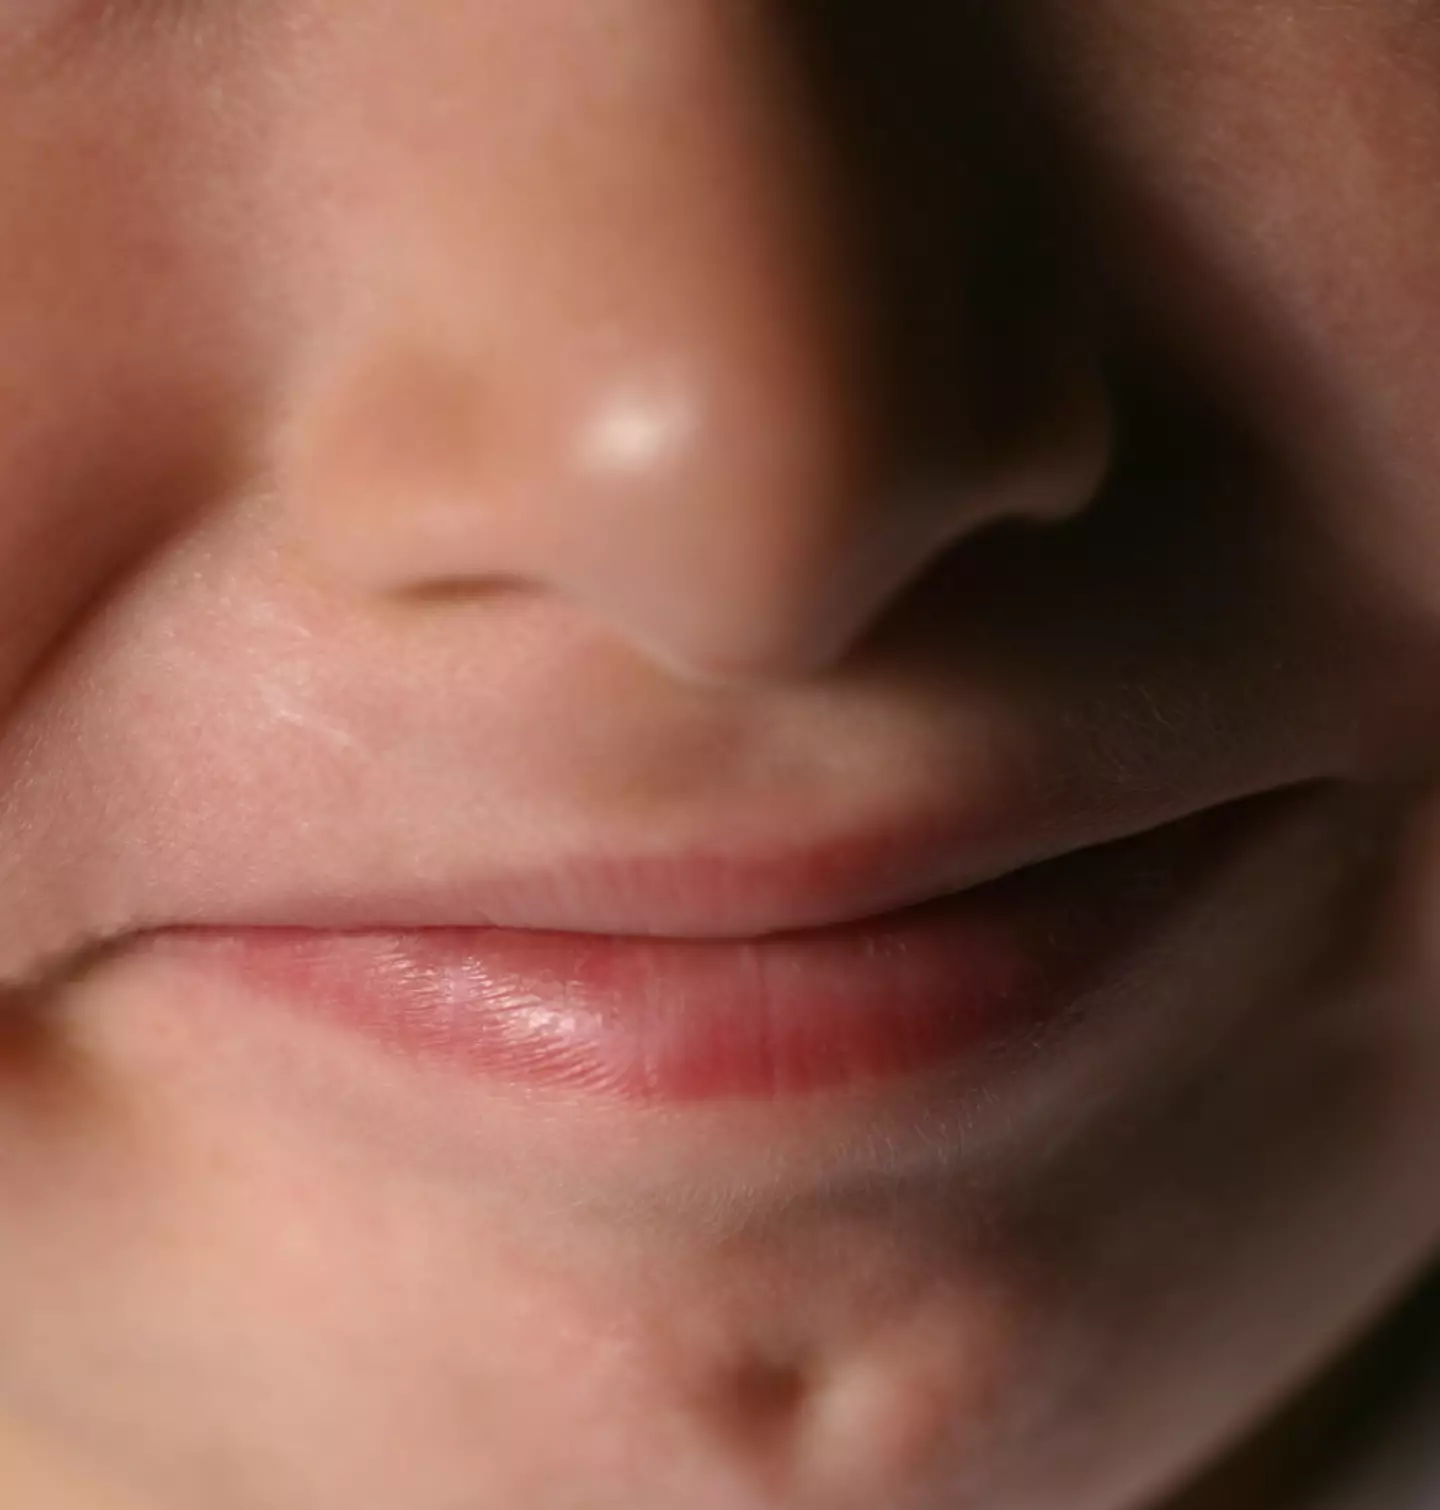 Chin dimples are making people feel 'nauseous'.